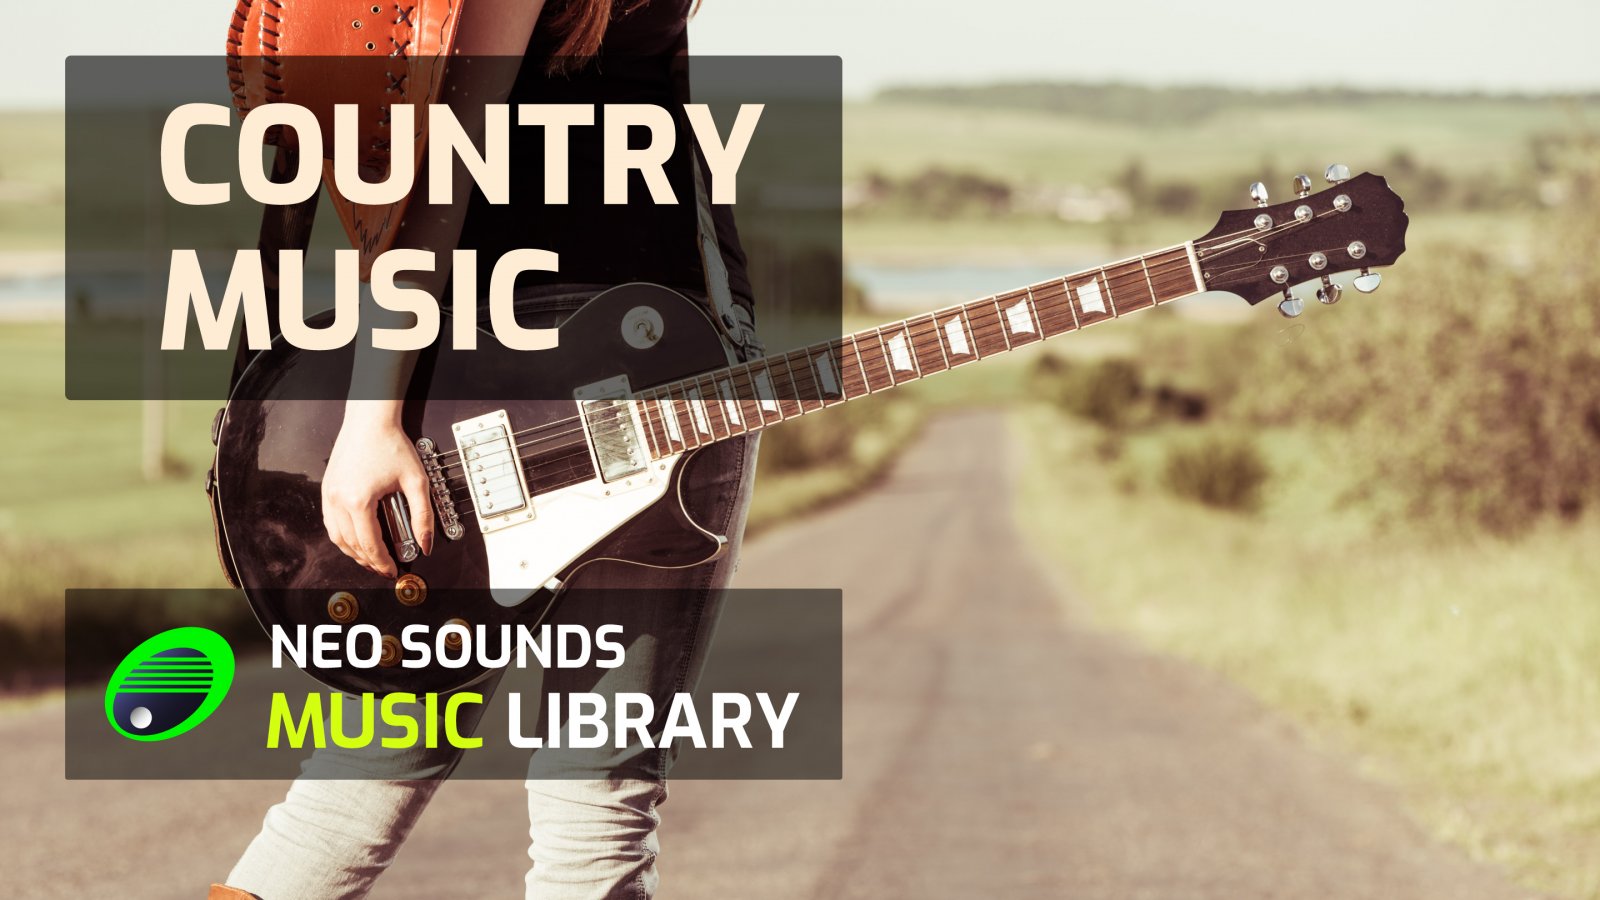 Royalty-free country music